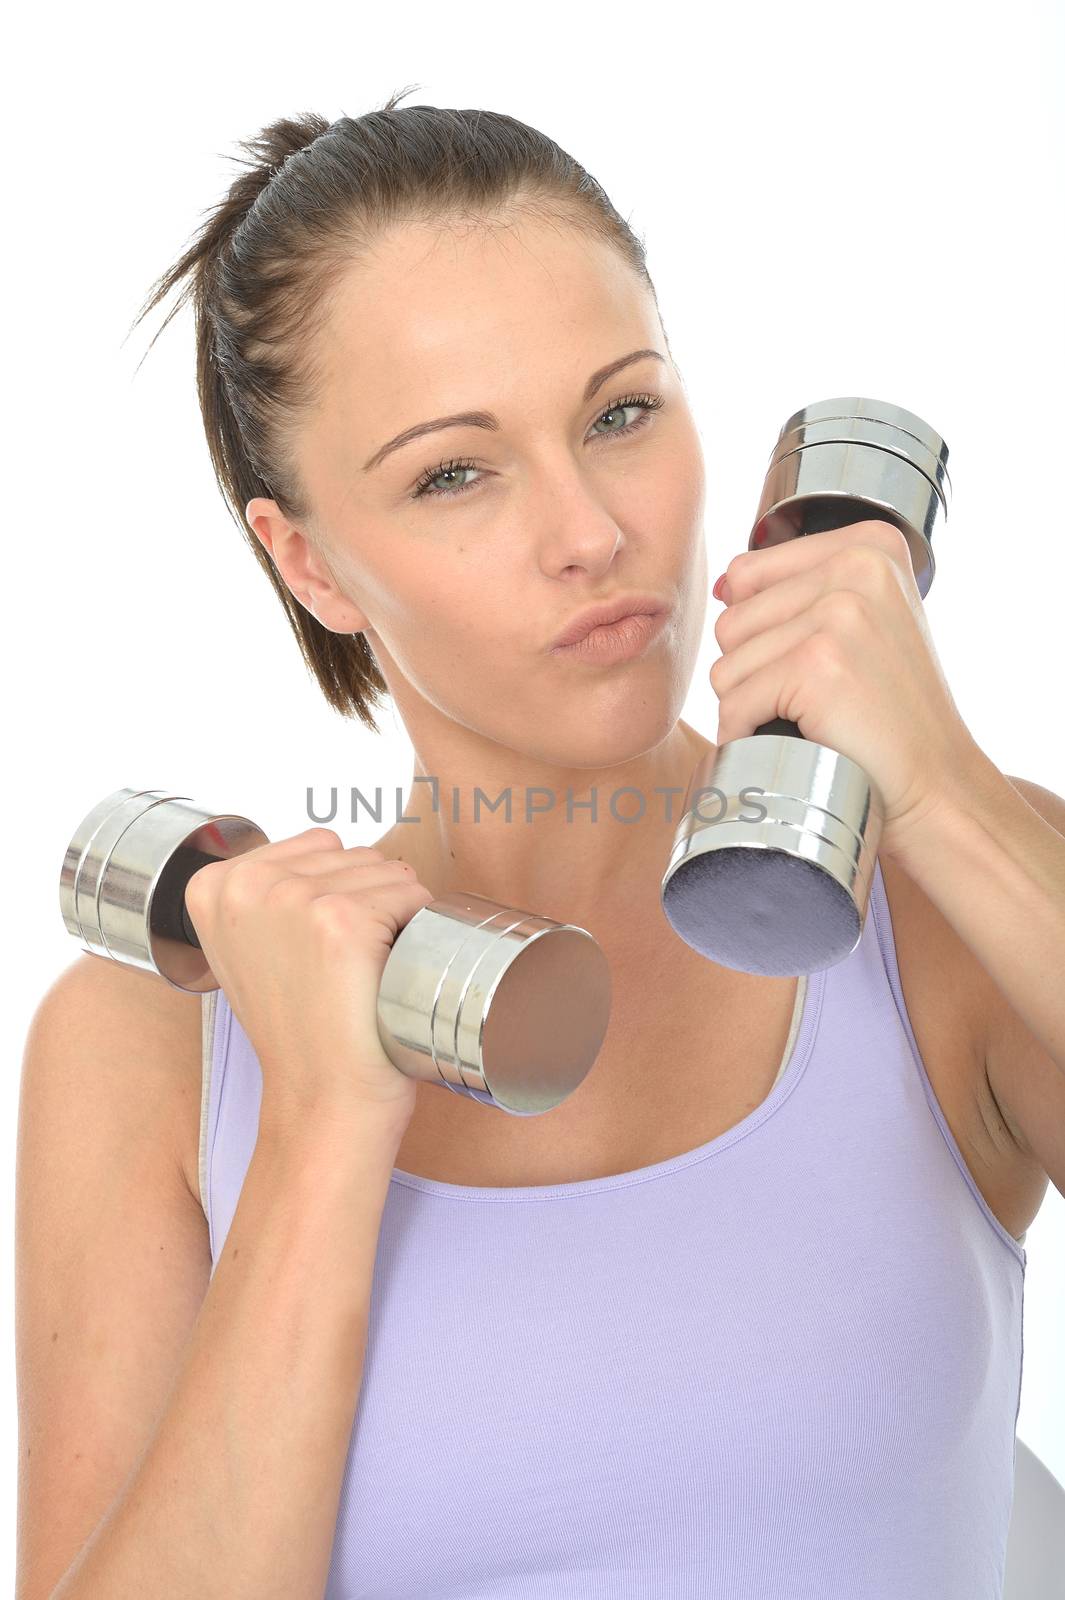 Healthy Aggressive Young Woman Training With Dumb Bell Weights by Whiteboxmedia